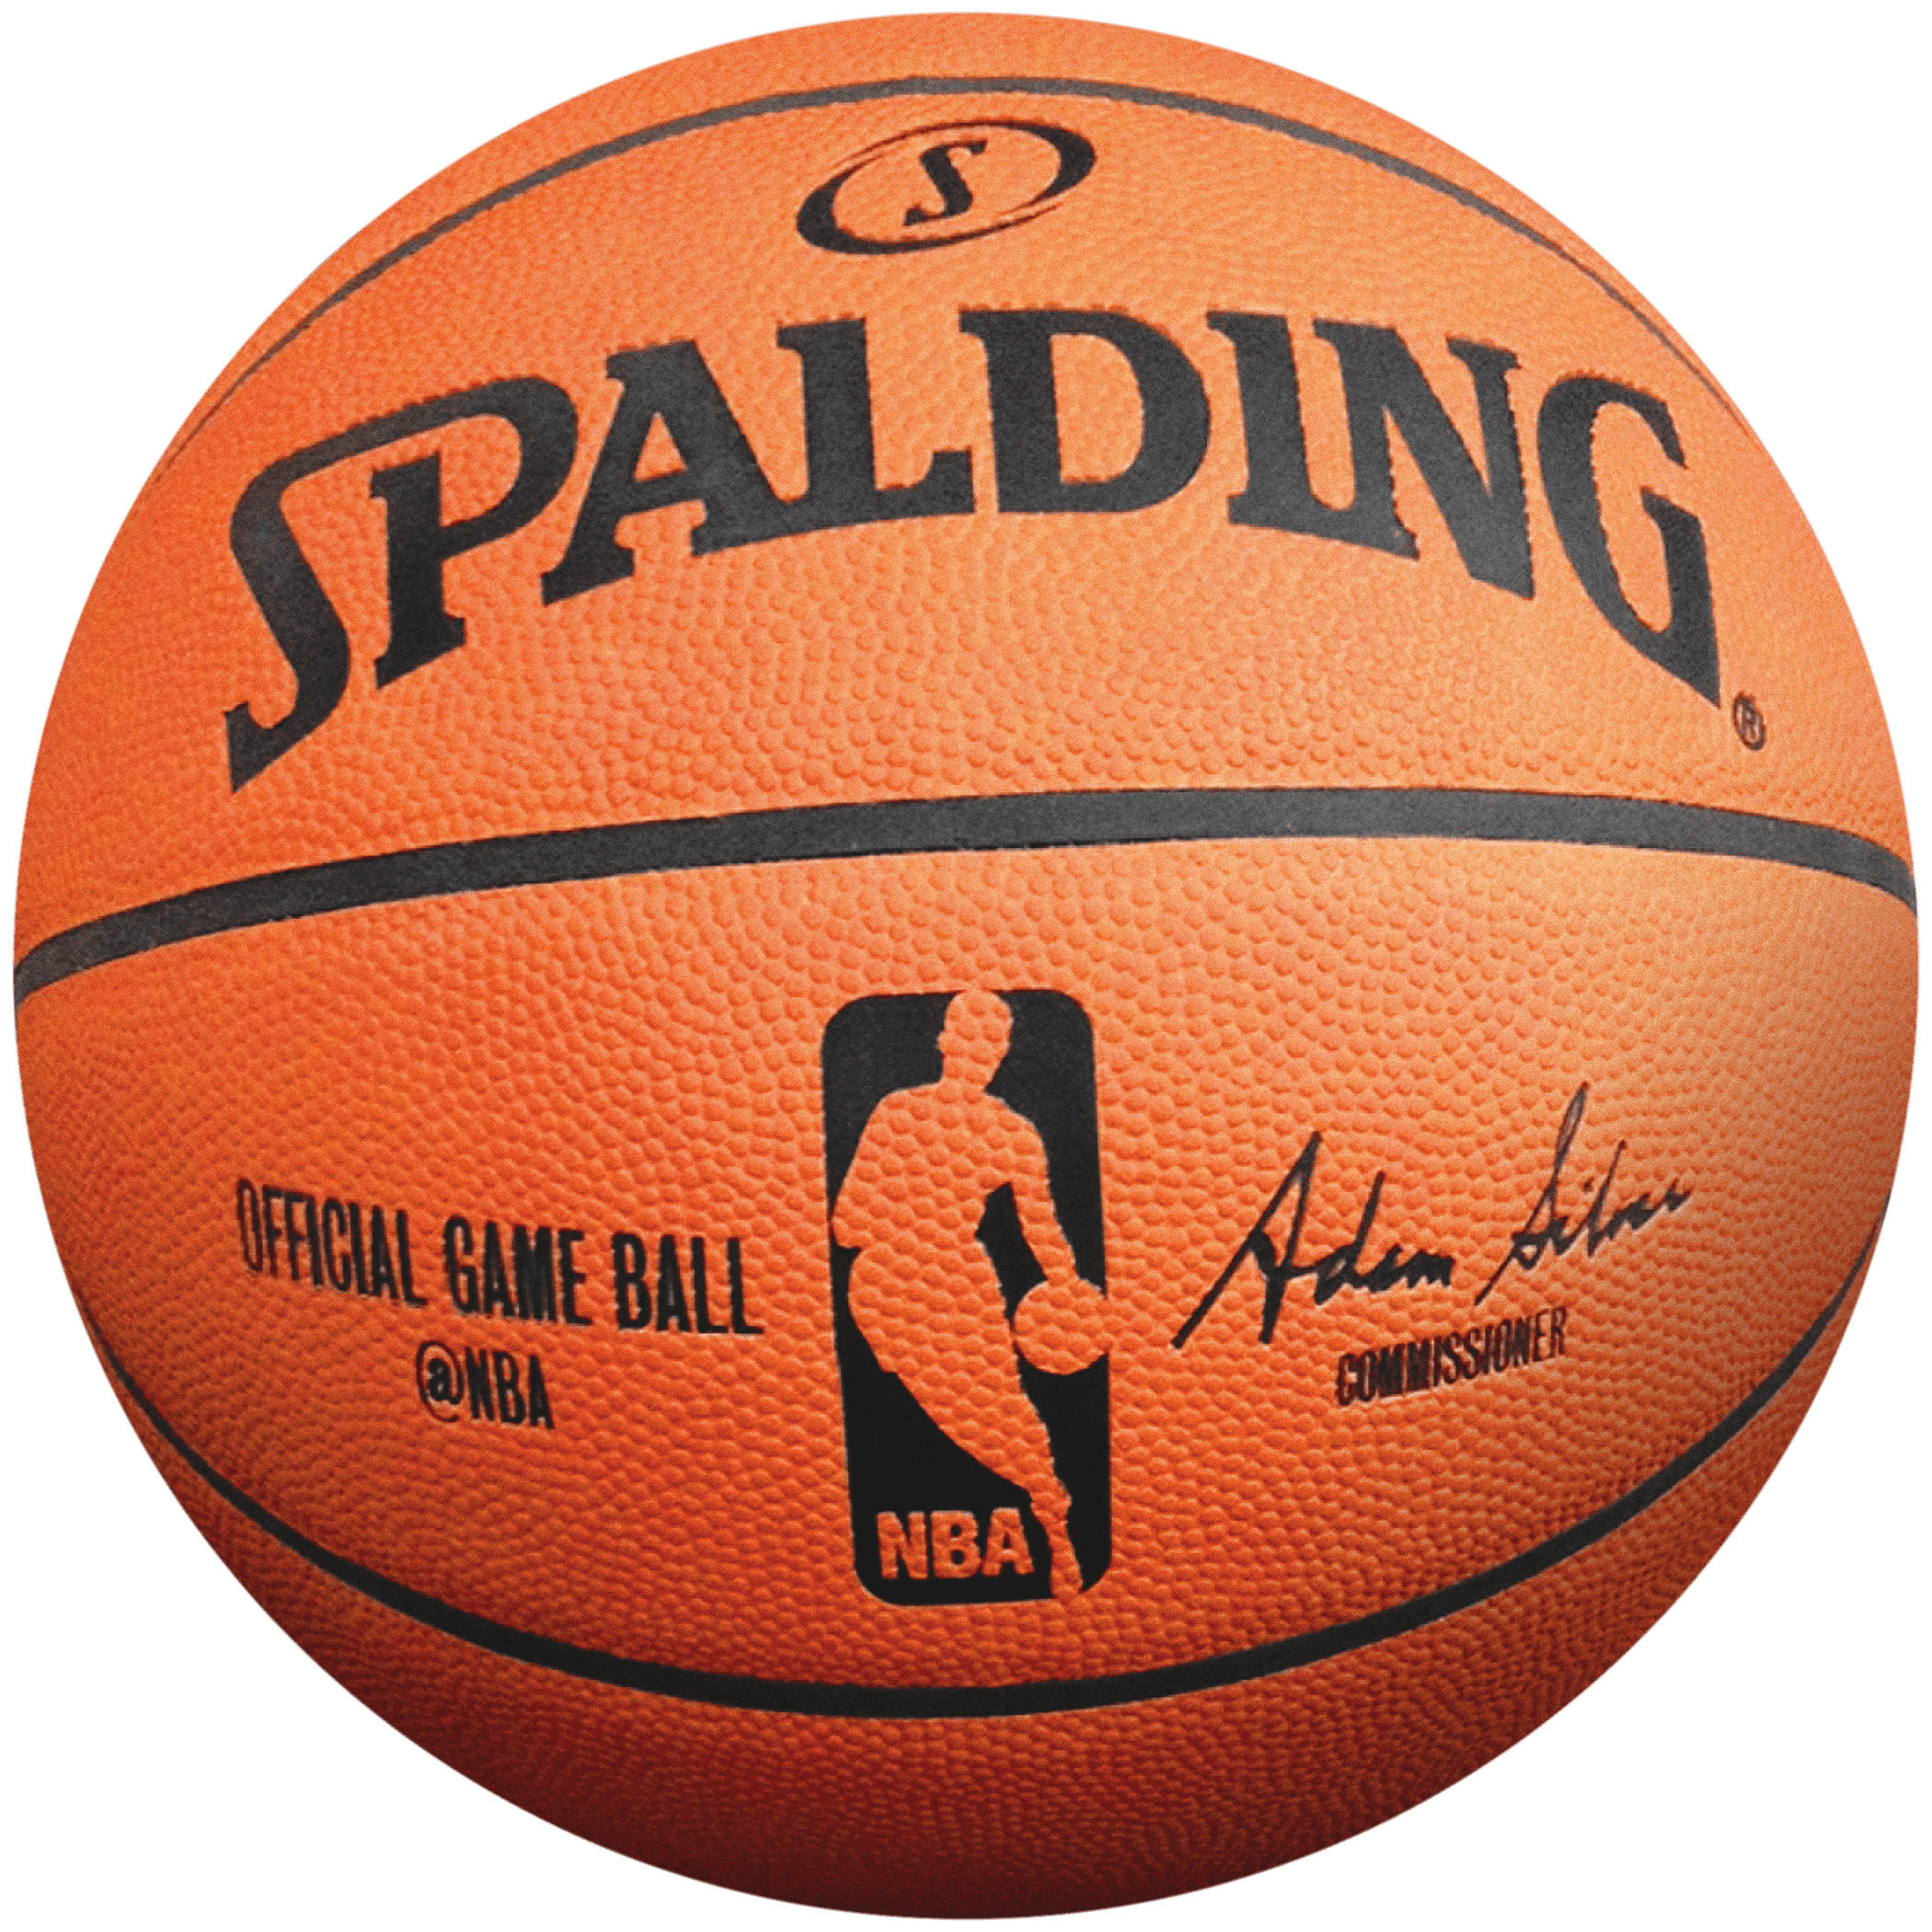 Spalding Basketball png icons